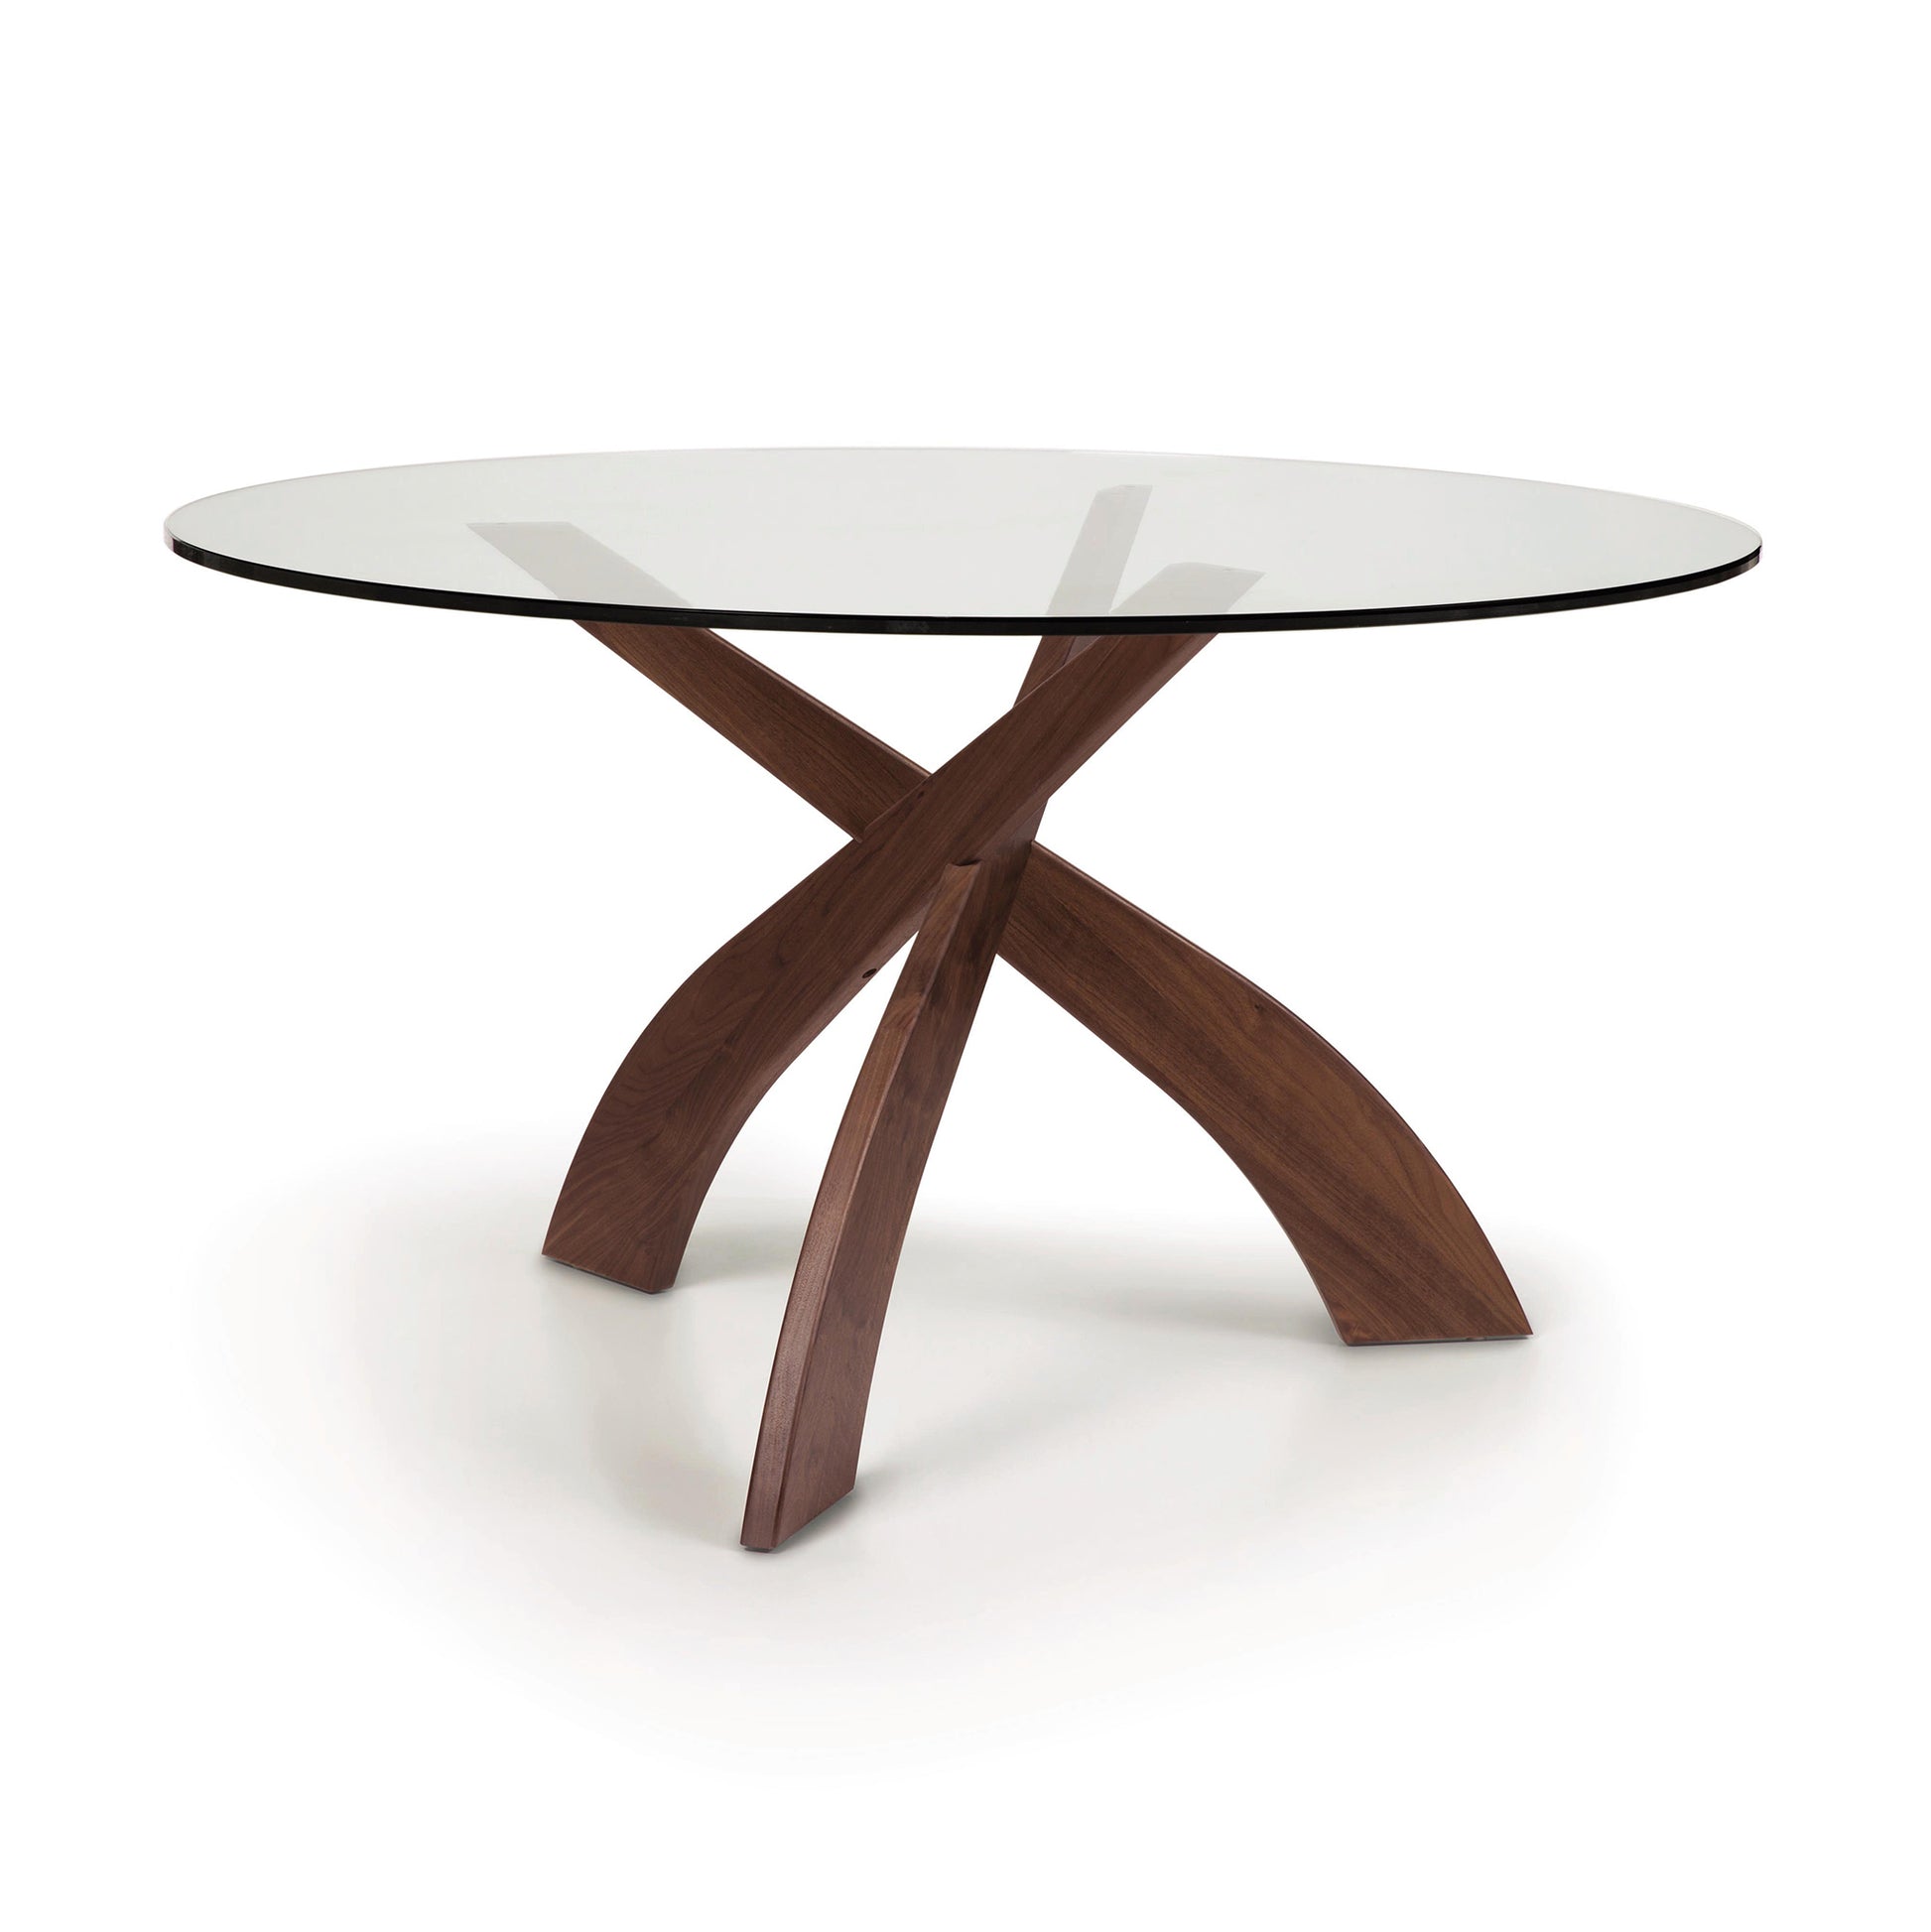 Entwine Round Glass Top Dining Table by Copeland Furniture with a tempered glass top and a sustainably sourced cherry wood cross-shaped base on a white background.